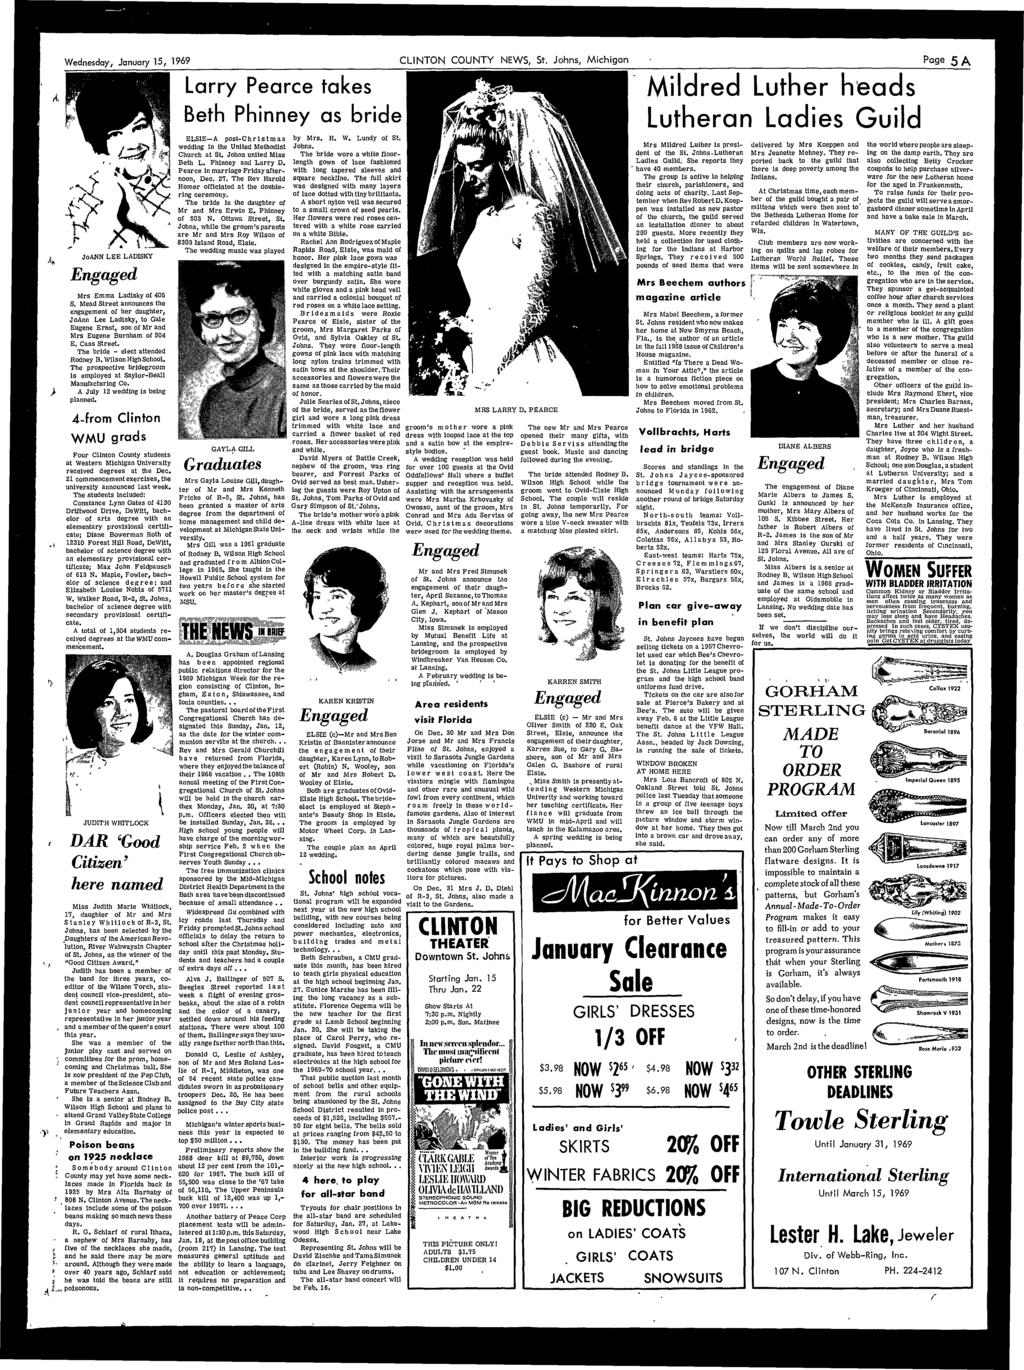 A <y> * Wednesday, January 15, 1969 CLINTON COUNTY NEWS, St. Johns, Michigan Page 5 A 1 JoANN LEE LADISKY Engaged Mrs Emma Ladisky of 405 S.